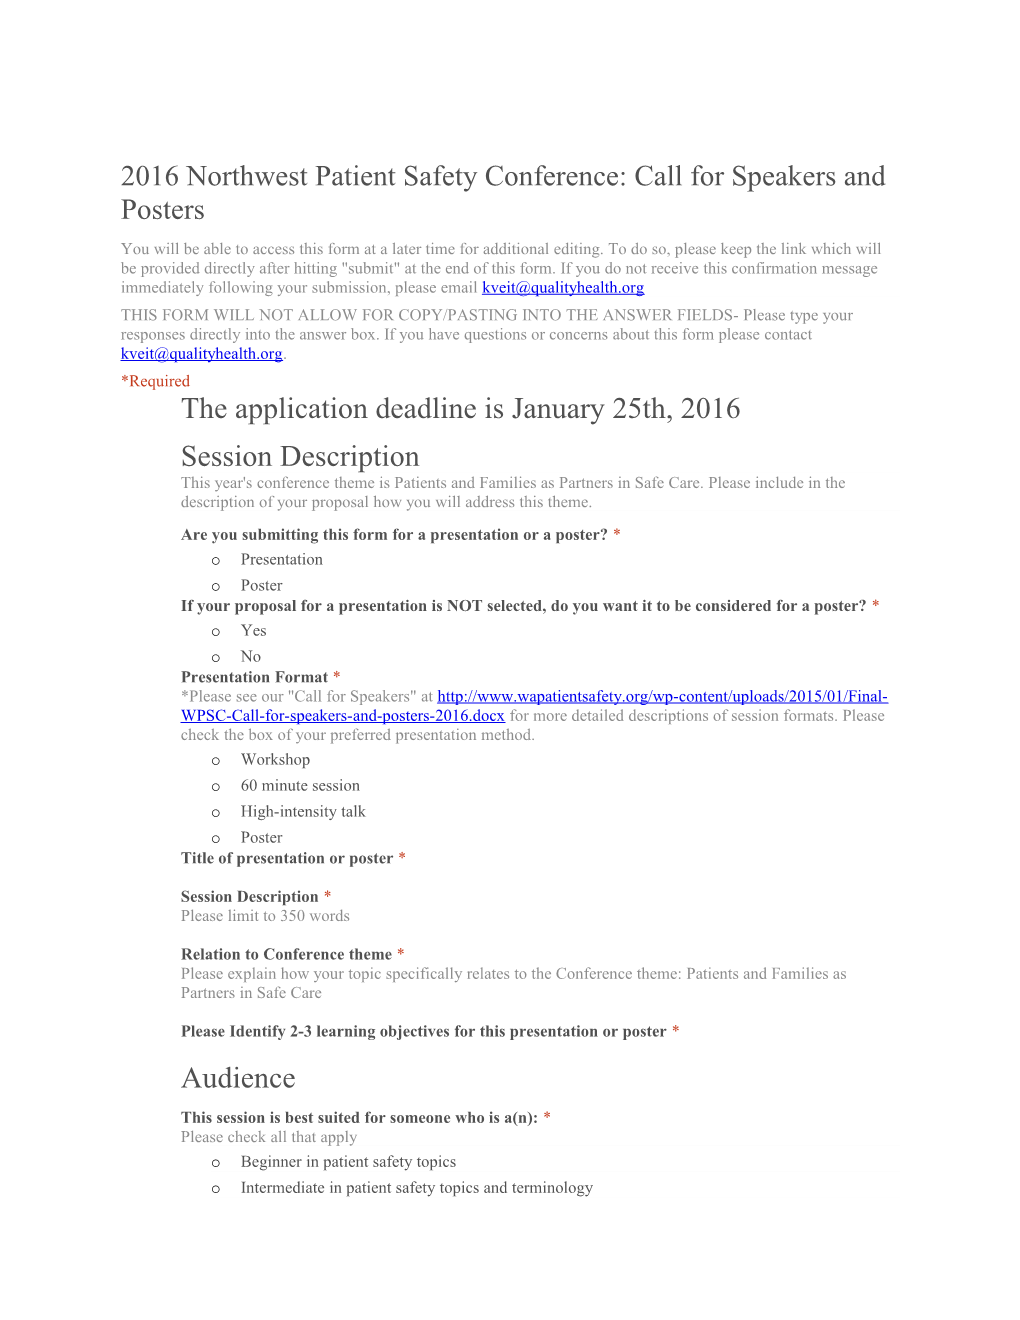 2016 Northwest Patient Safety Conference: Call for Speakers and Posters